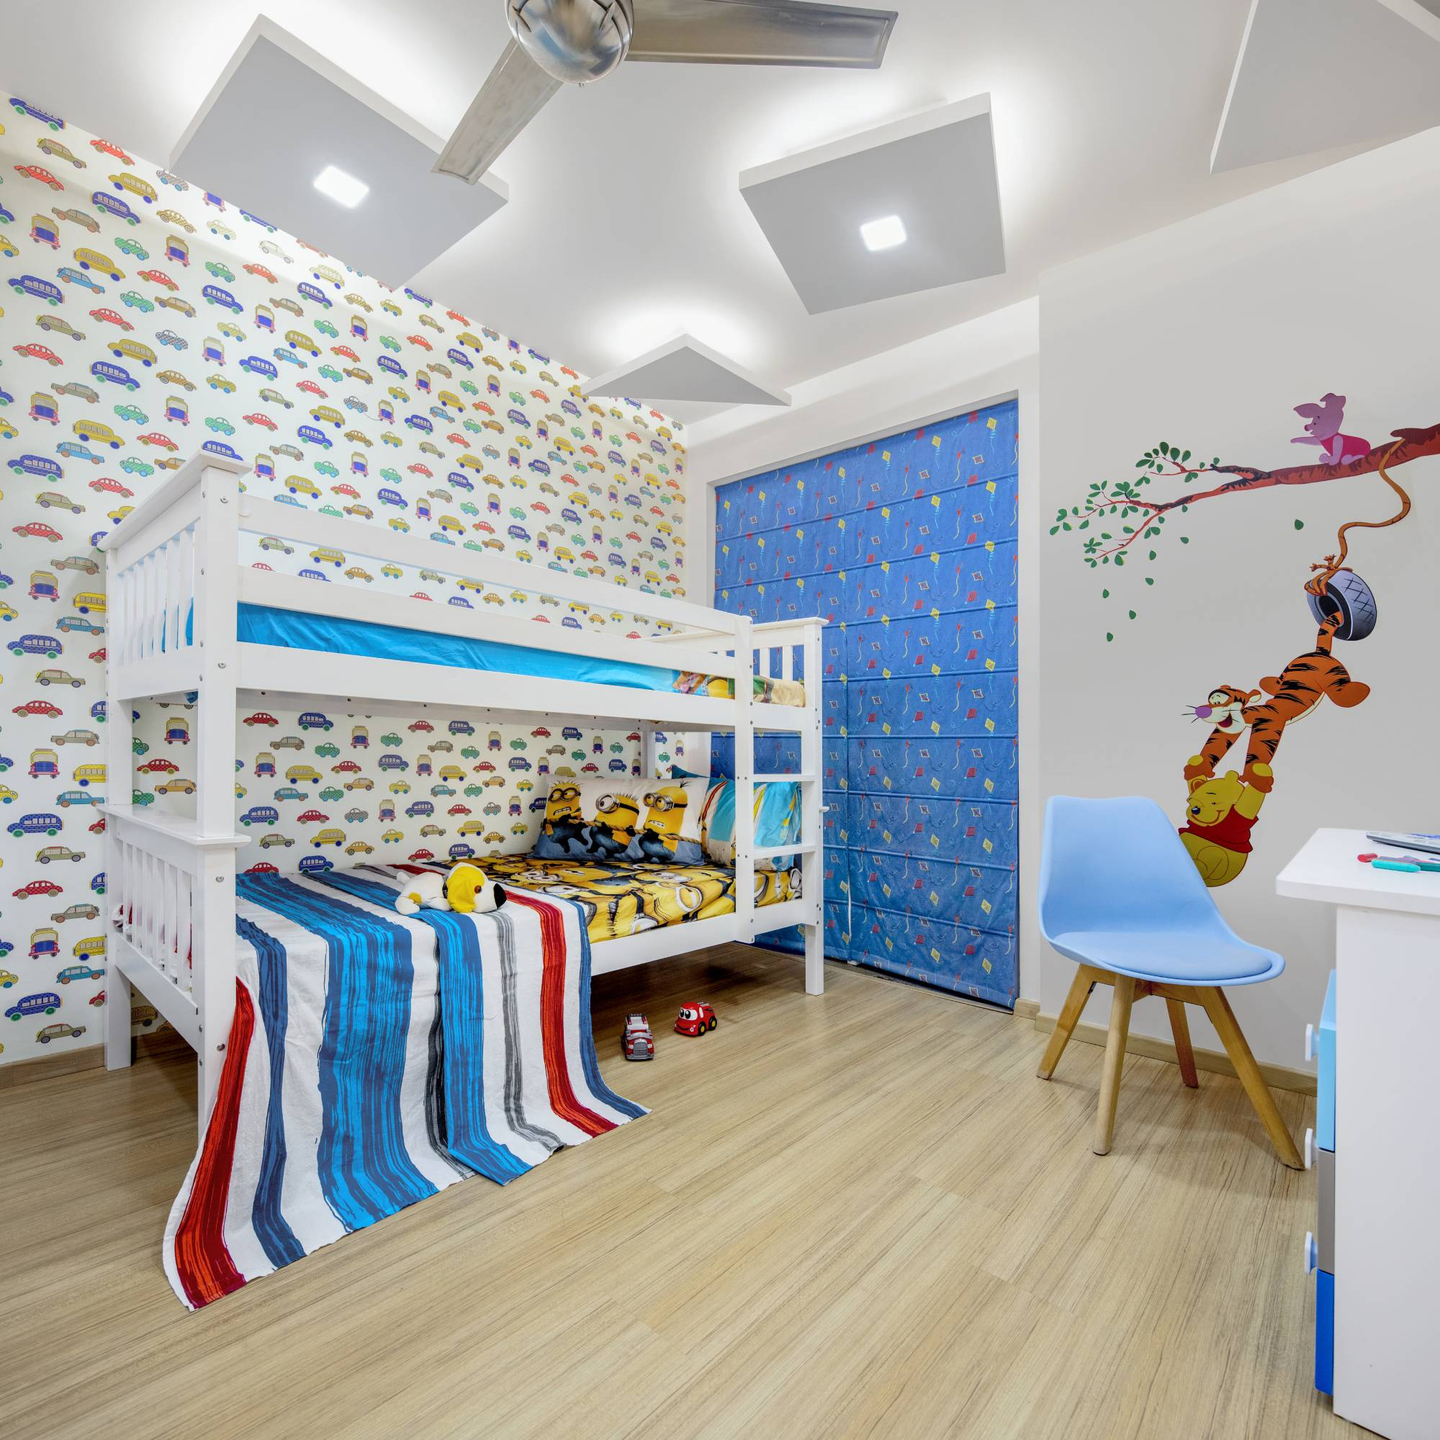 Kids' Room With White And Blue Bunk Bed And Wallpaper Designs - Livspace